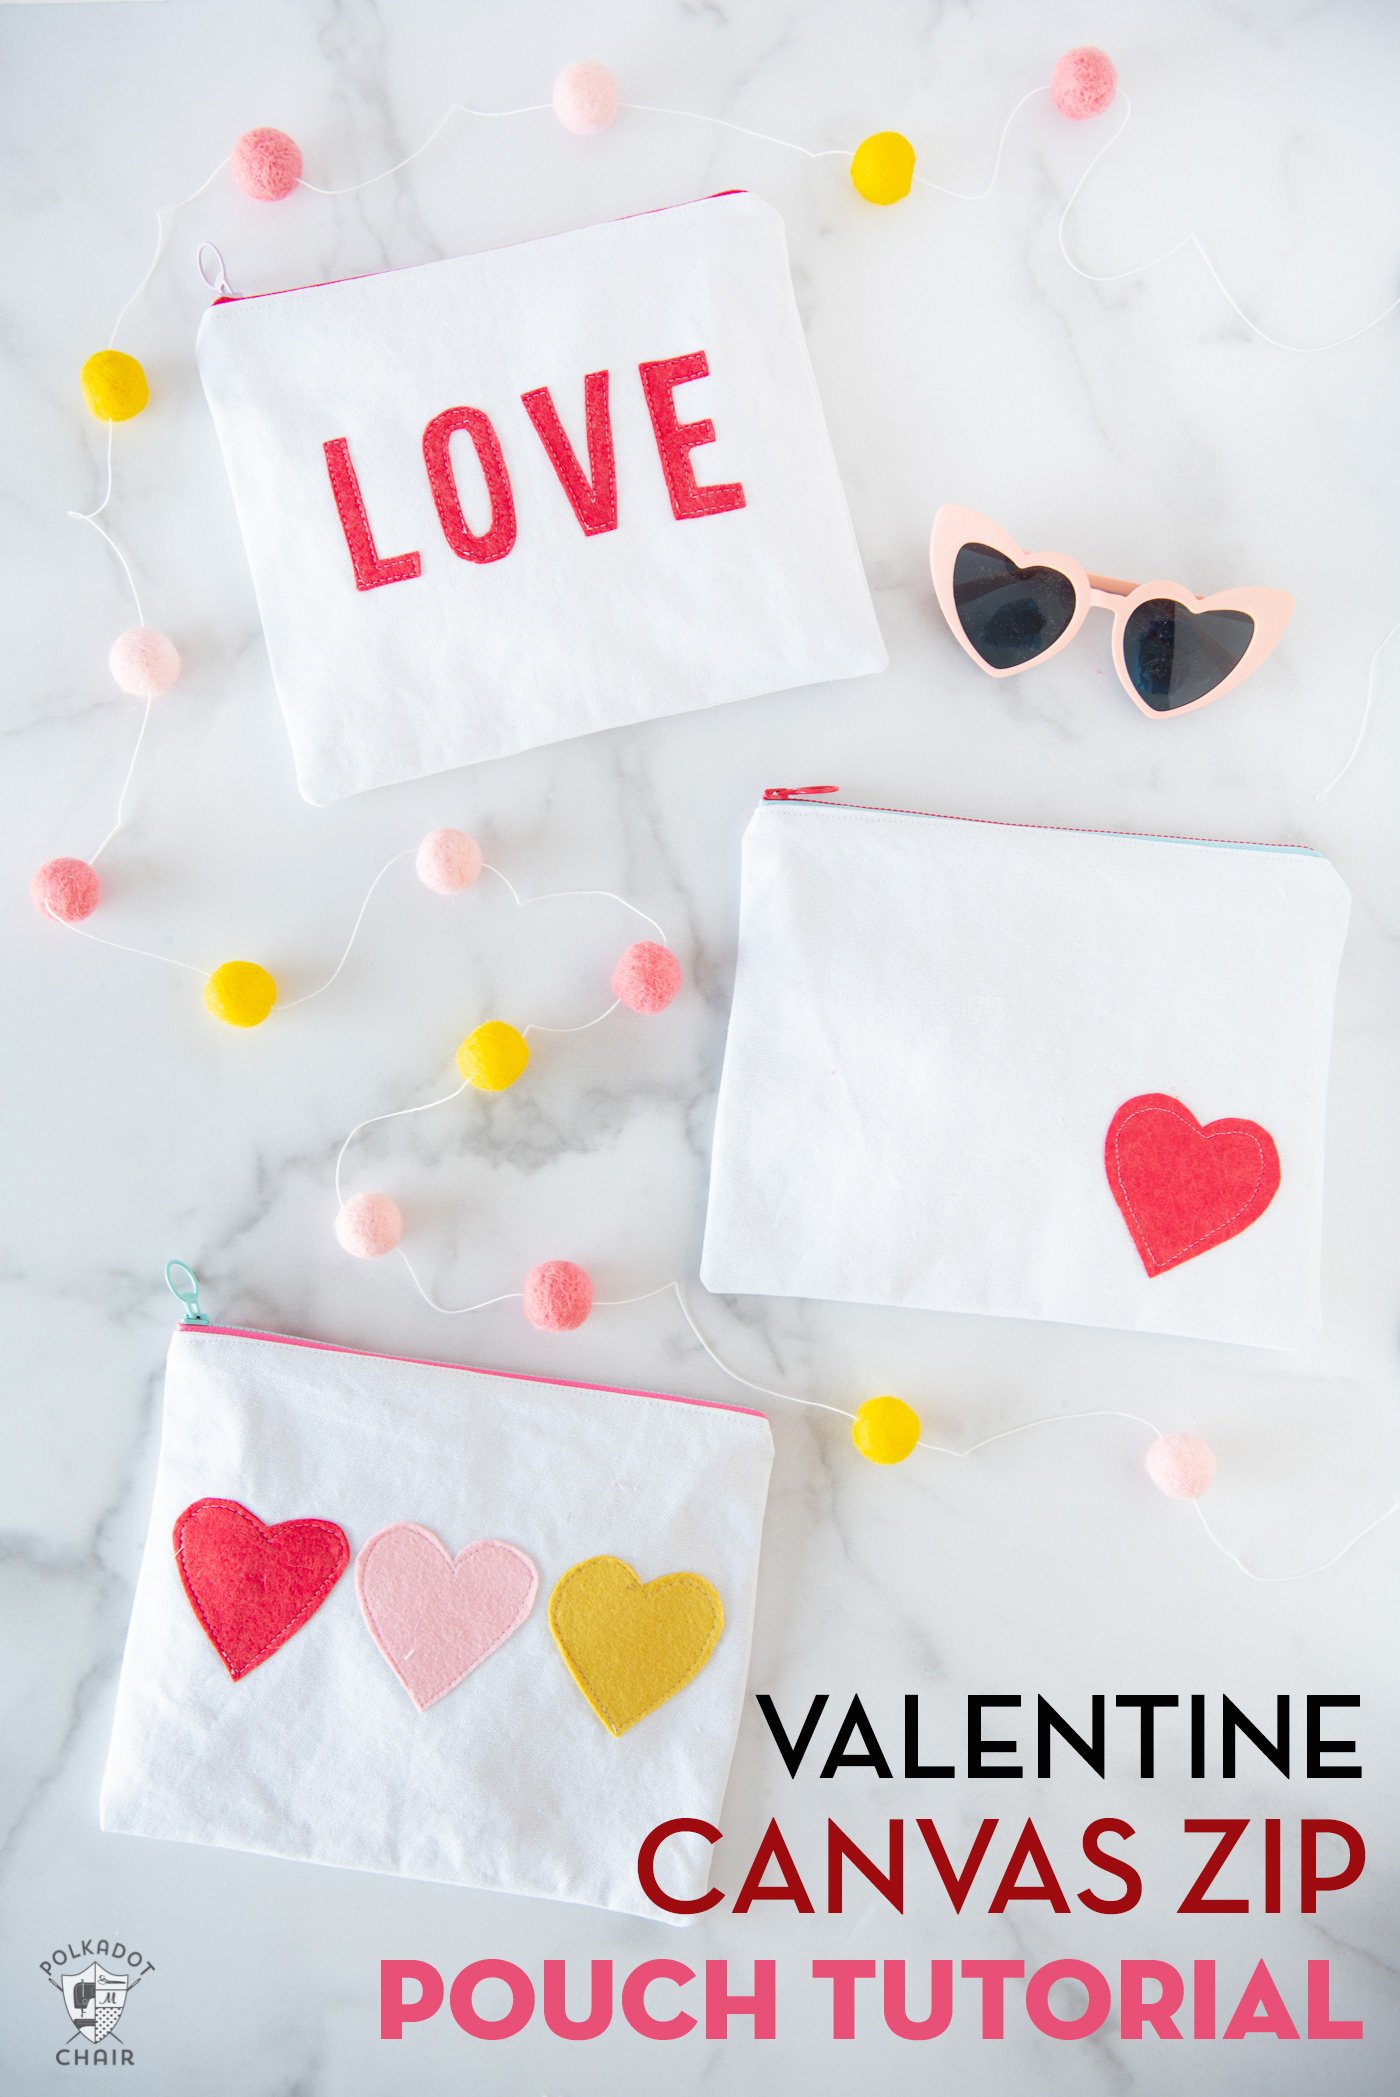 How to Make Canvas Zip Bags Perfect for Valentine’s Day